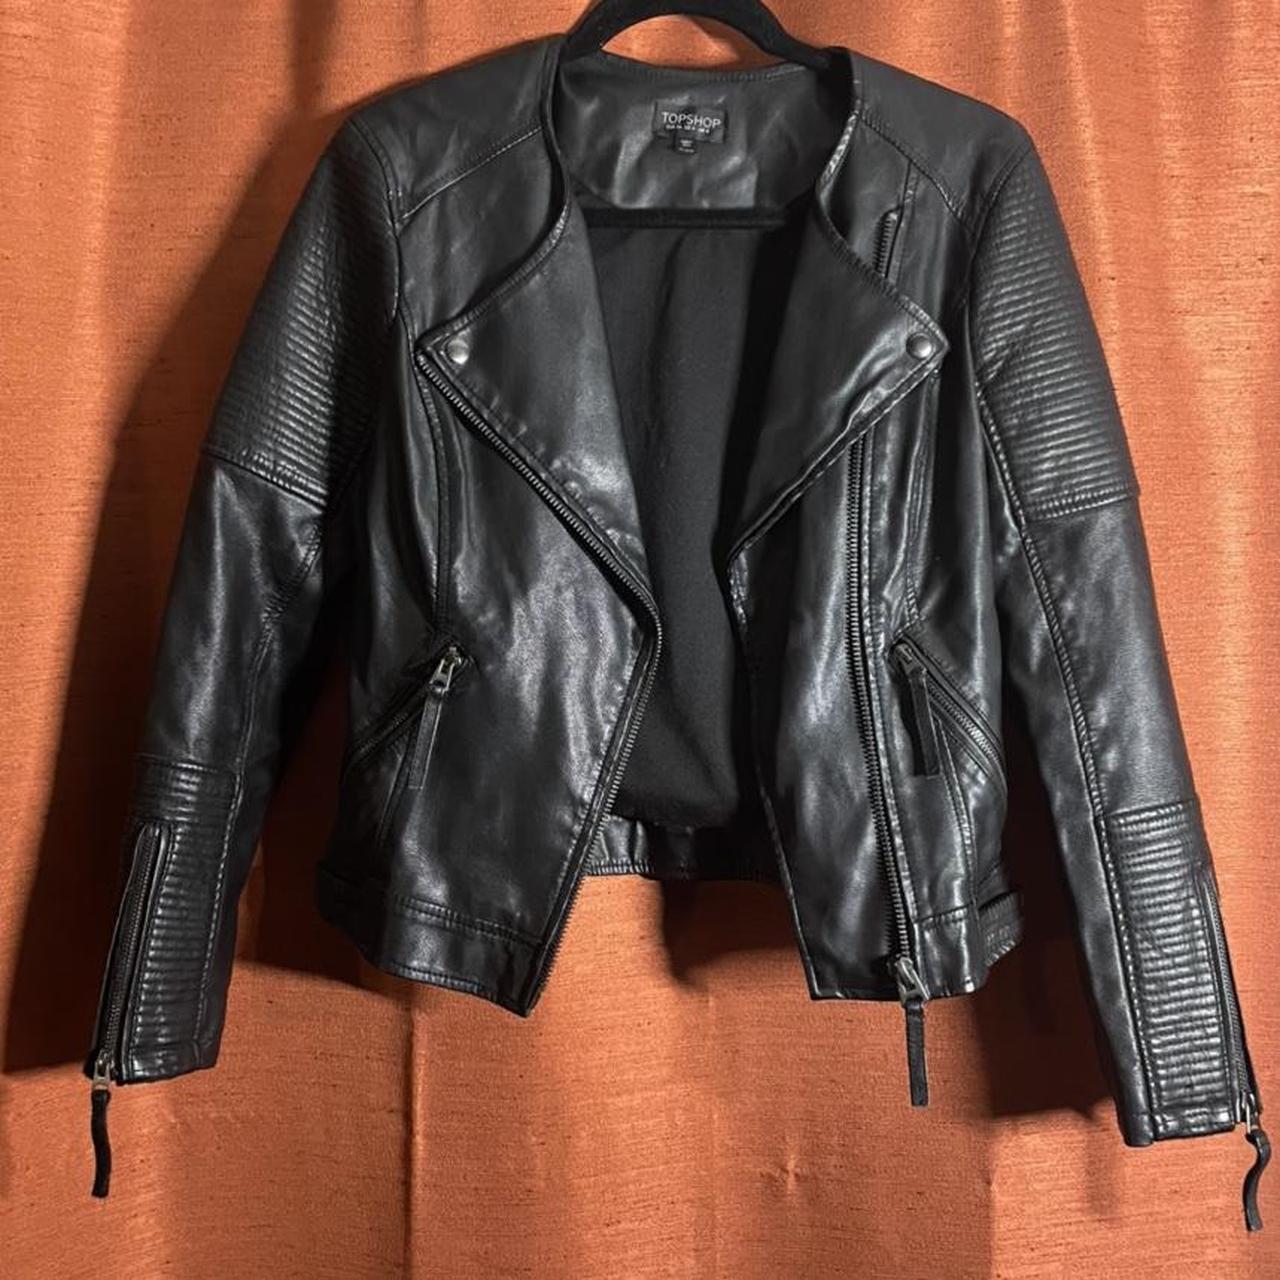 Faux leather jacket from Topshop - Depop